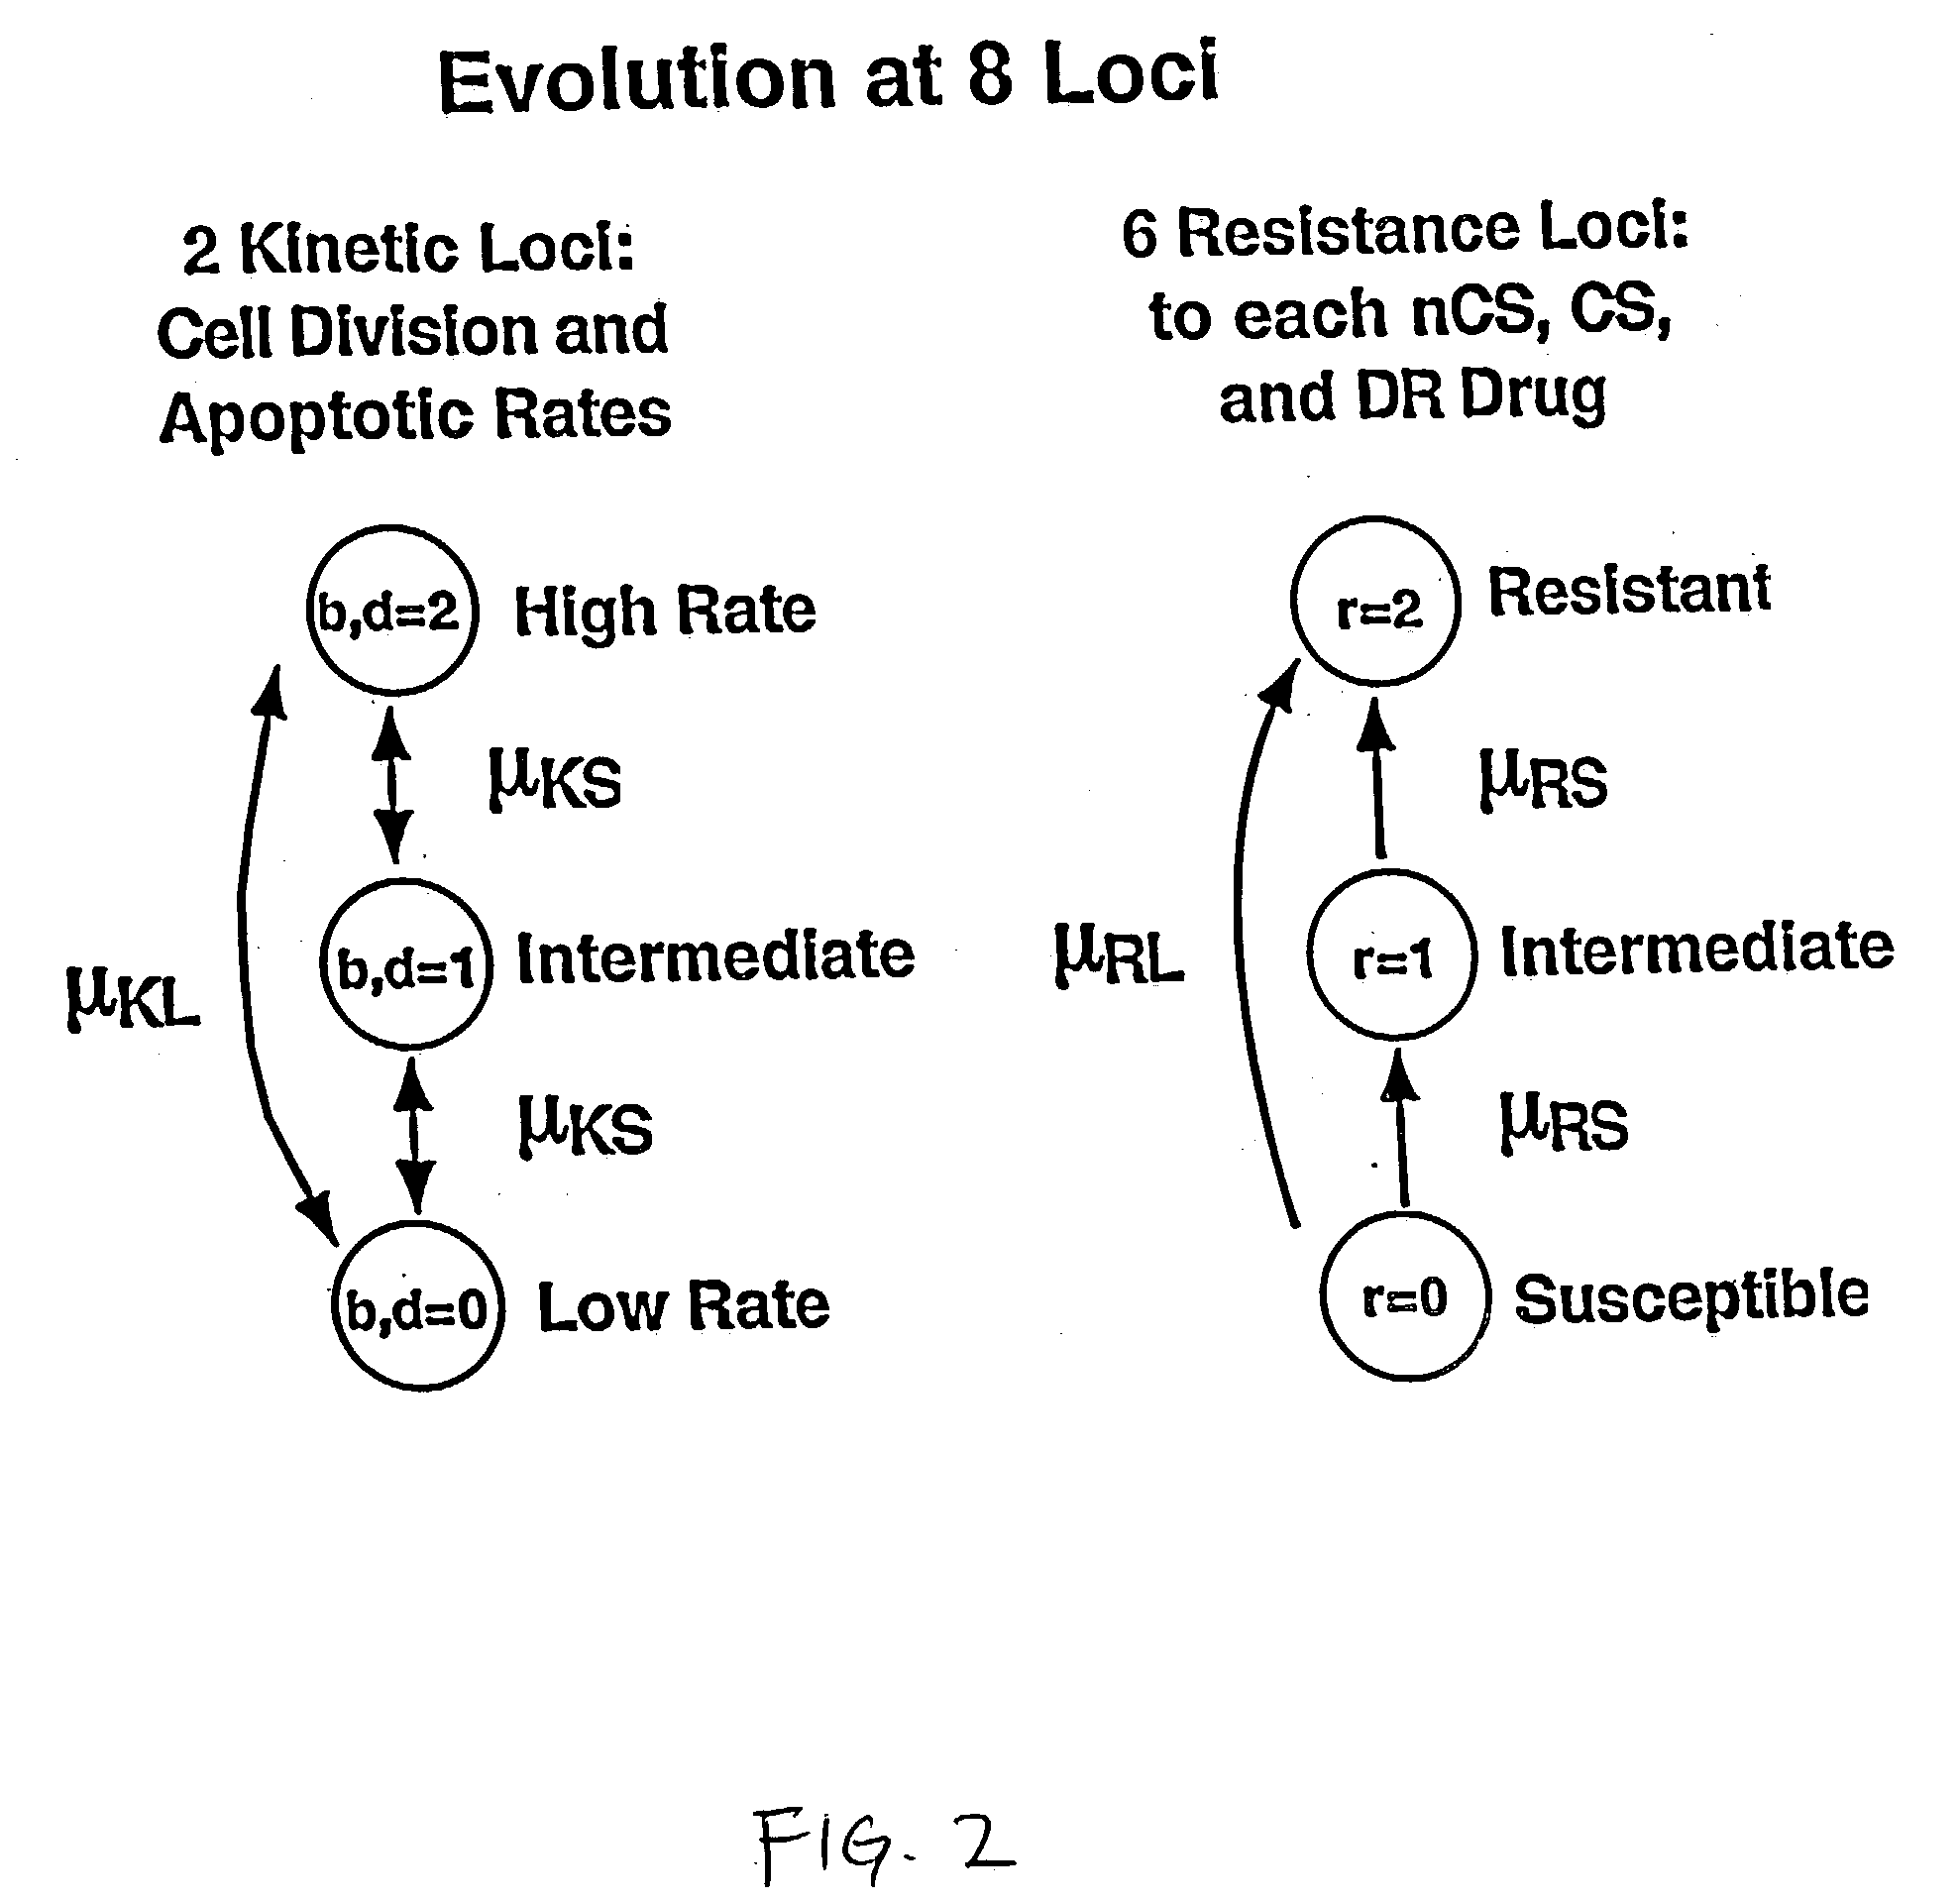 Computational model, method, and system for kinetically-tailoring multi-drug chemotherapy for individuals